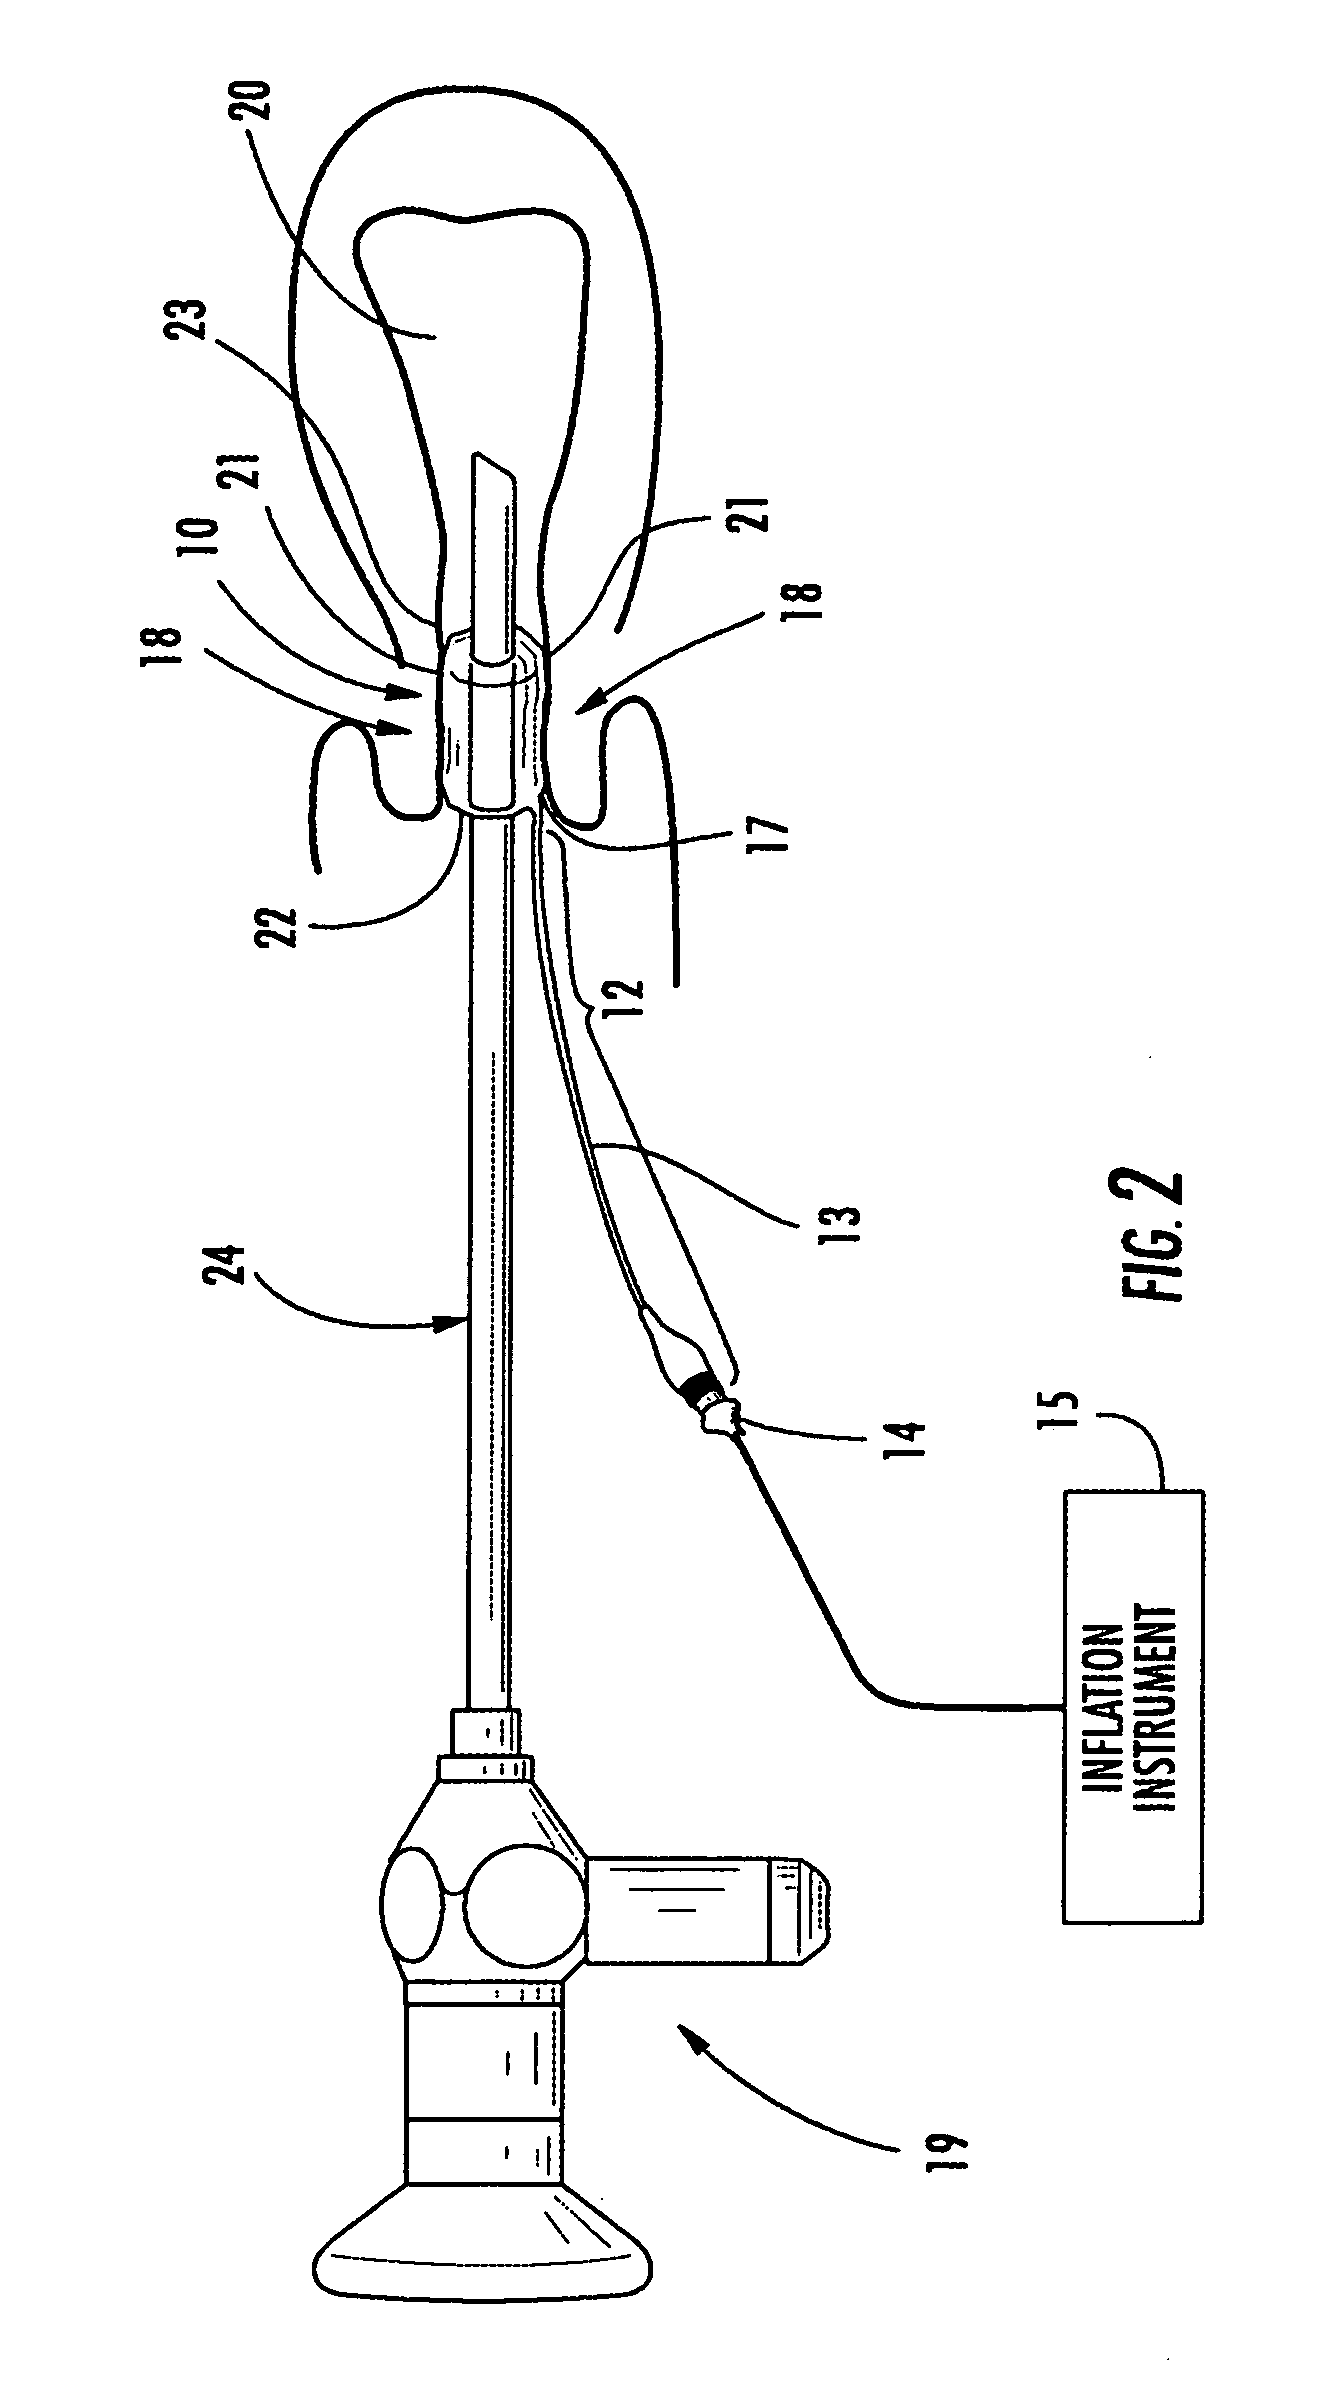 Device for sealing a body canal and method of use